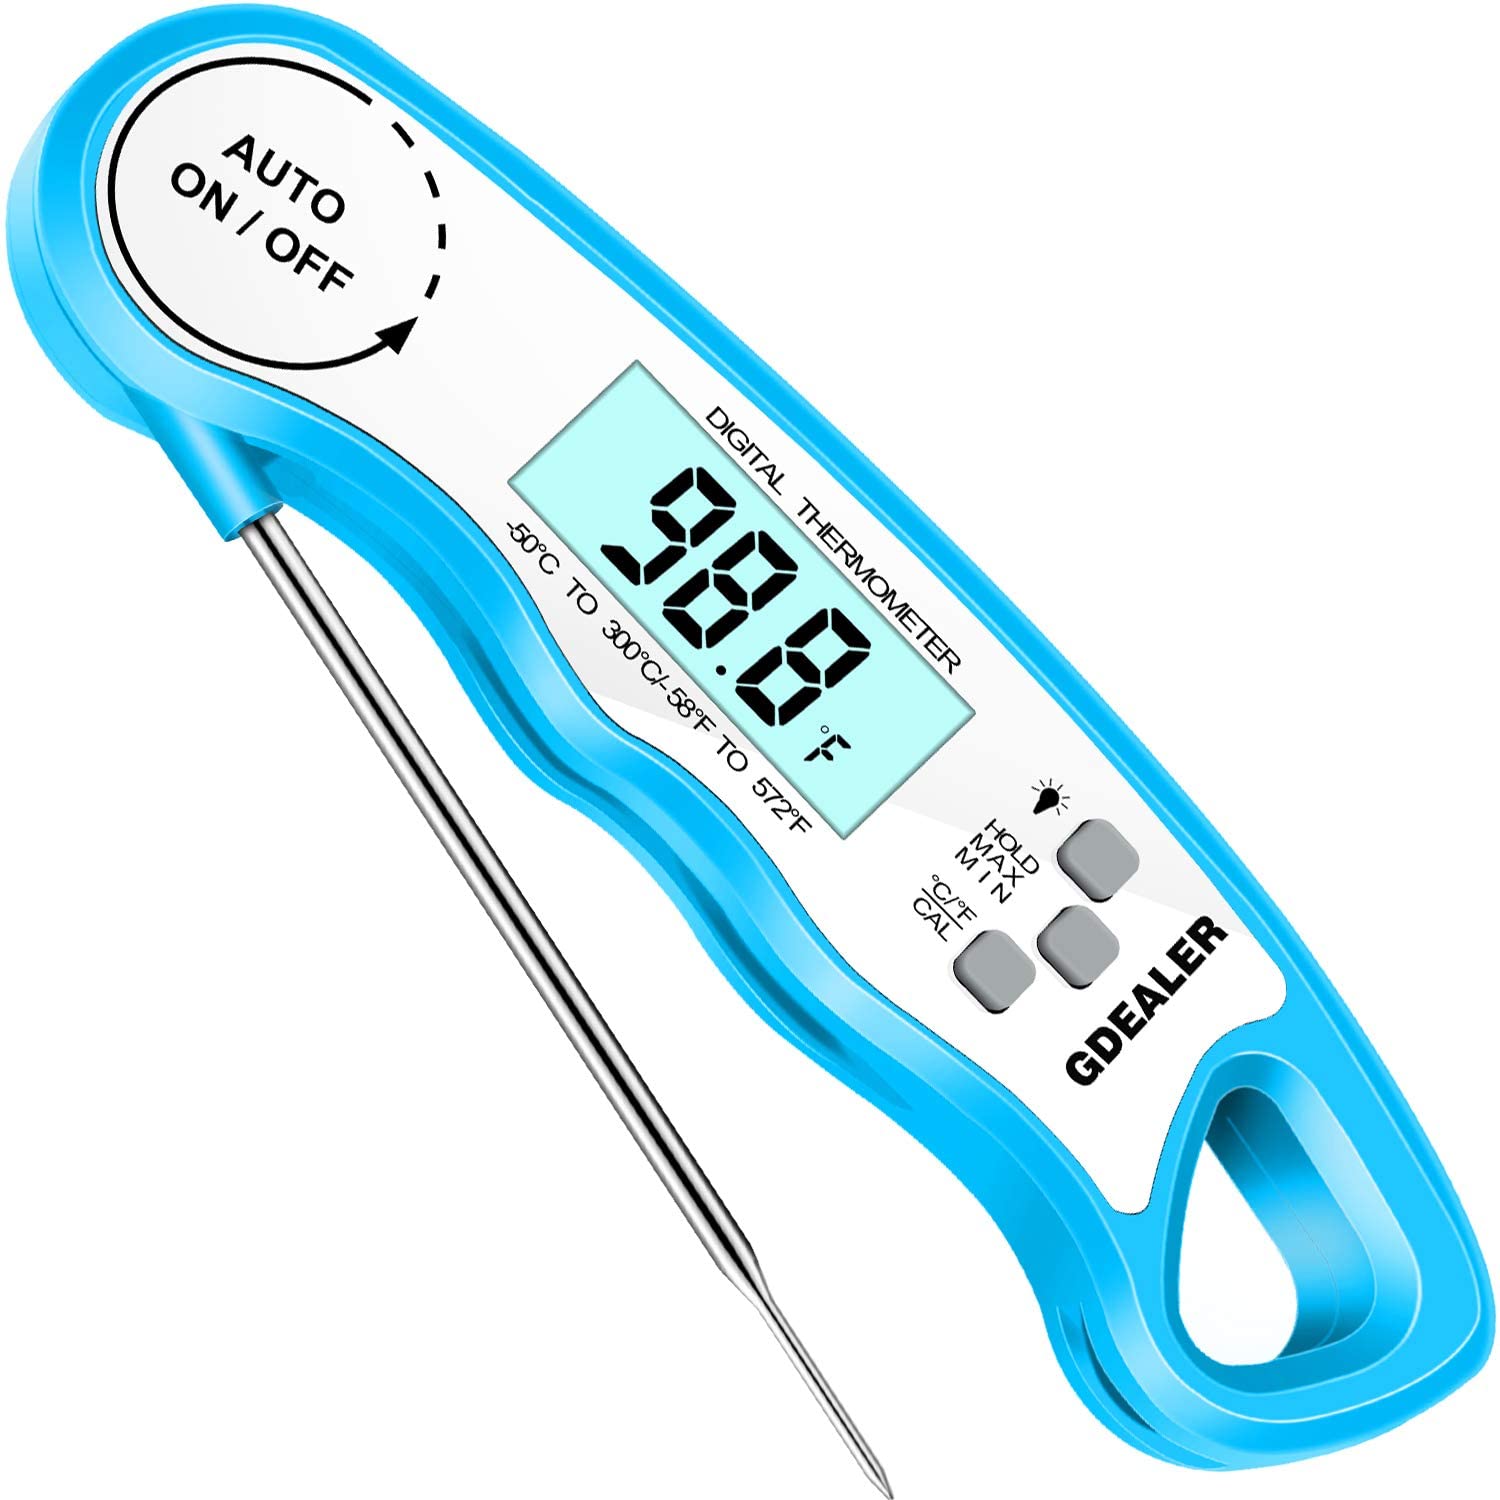 GDEALER Meat Thermometer Digital Instant Read Thermometer Ultra-Fast Cooking Food Thermometer with 4.6” Folding Probe Calibration Function for Kitchen Milk Candy, BBQ Grill, Smokers Blue